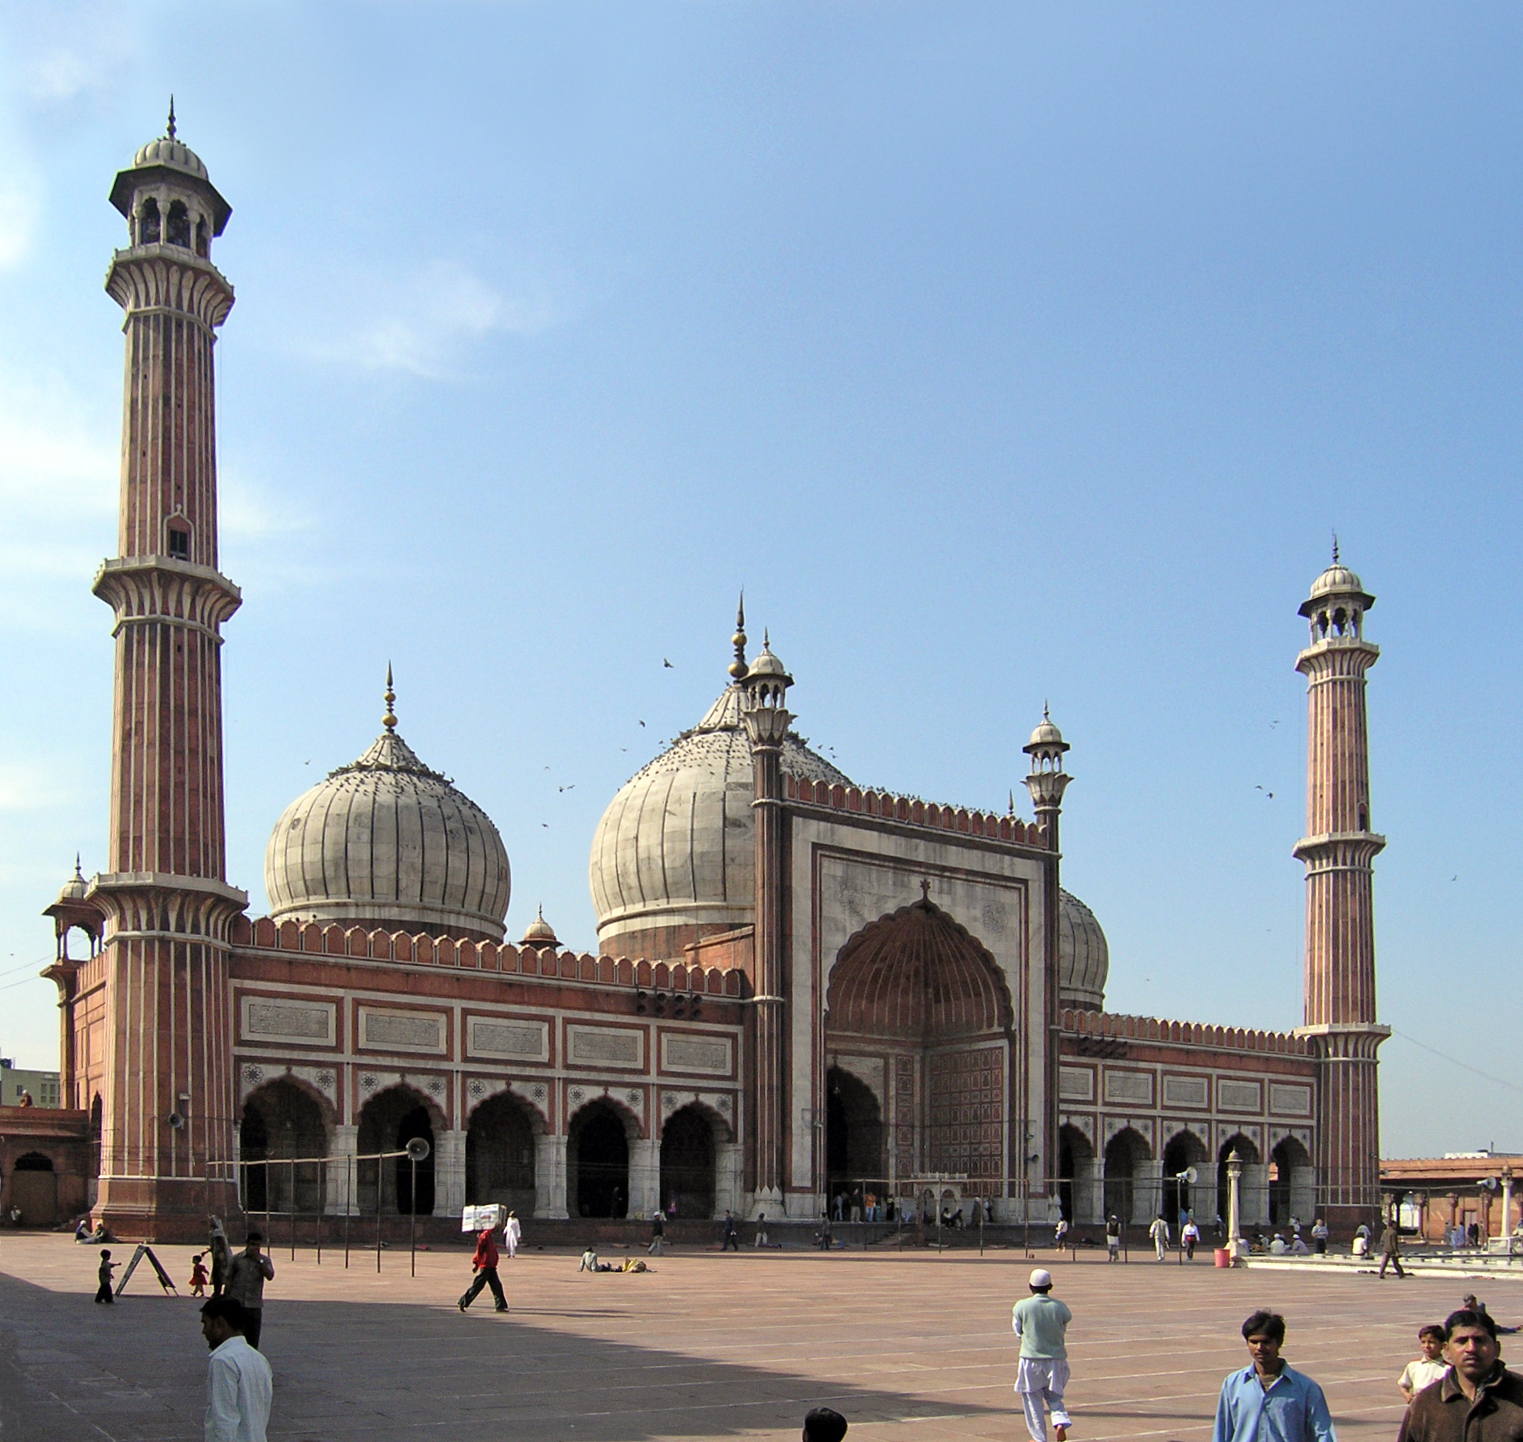 Jama_Masjid_is_the_largest_mosque_in_India._Delhi,_India..jpg